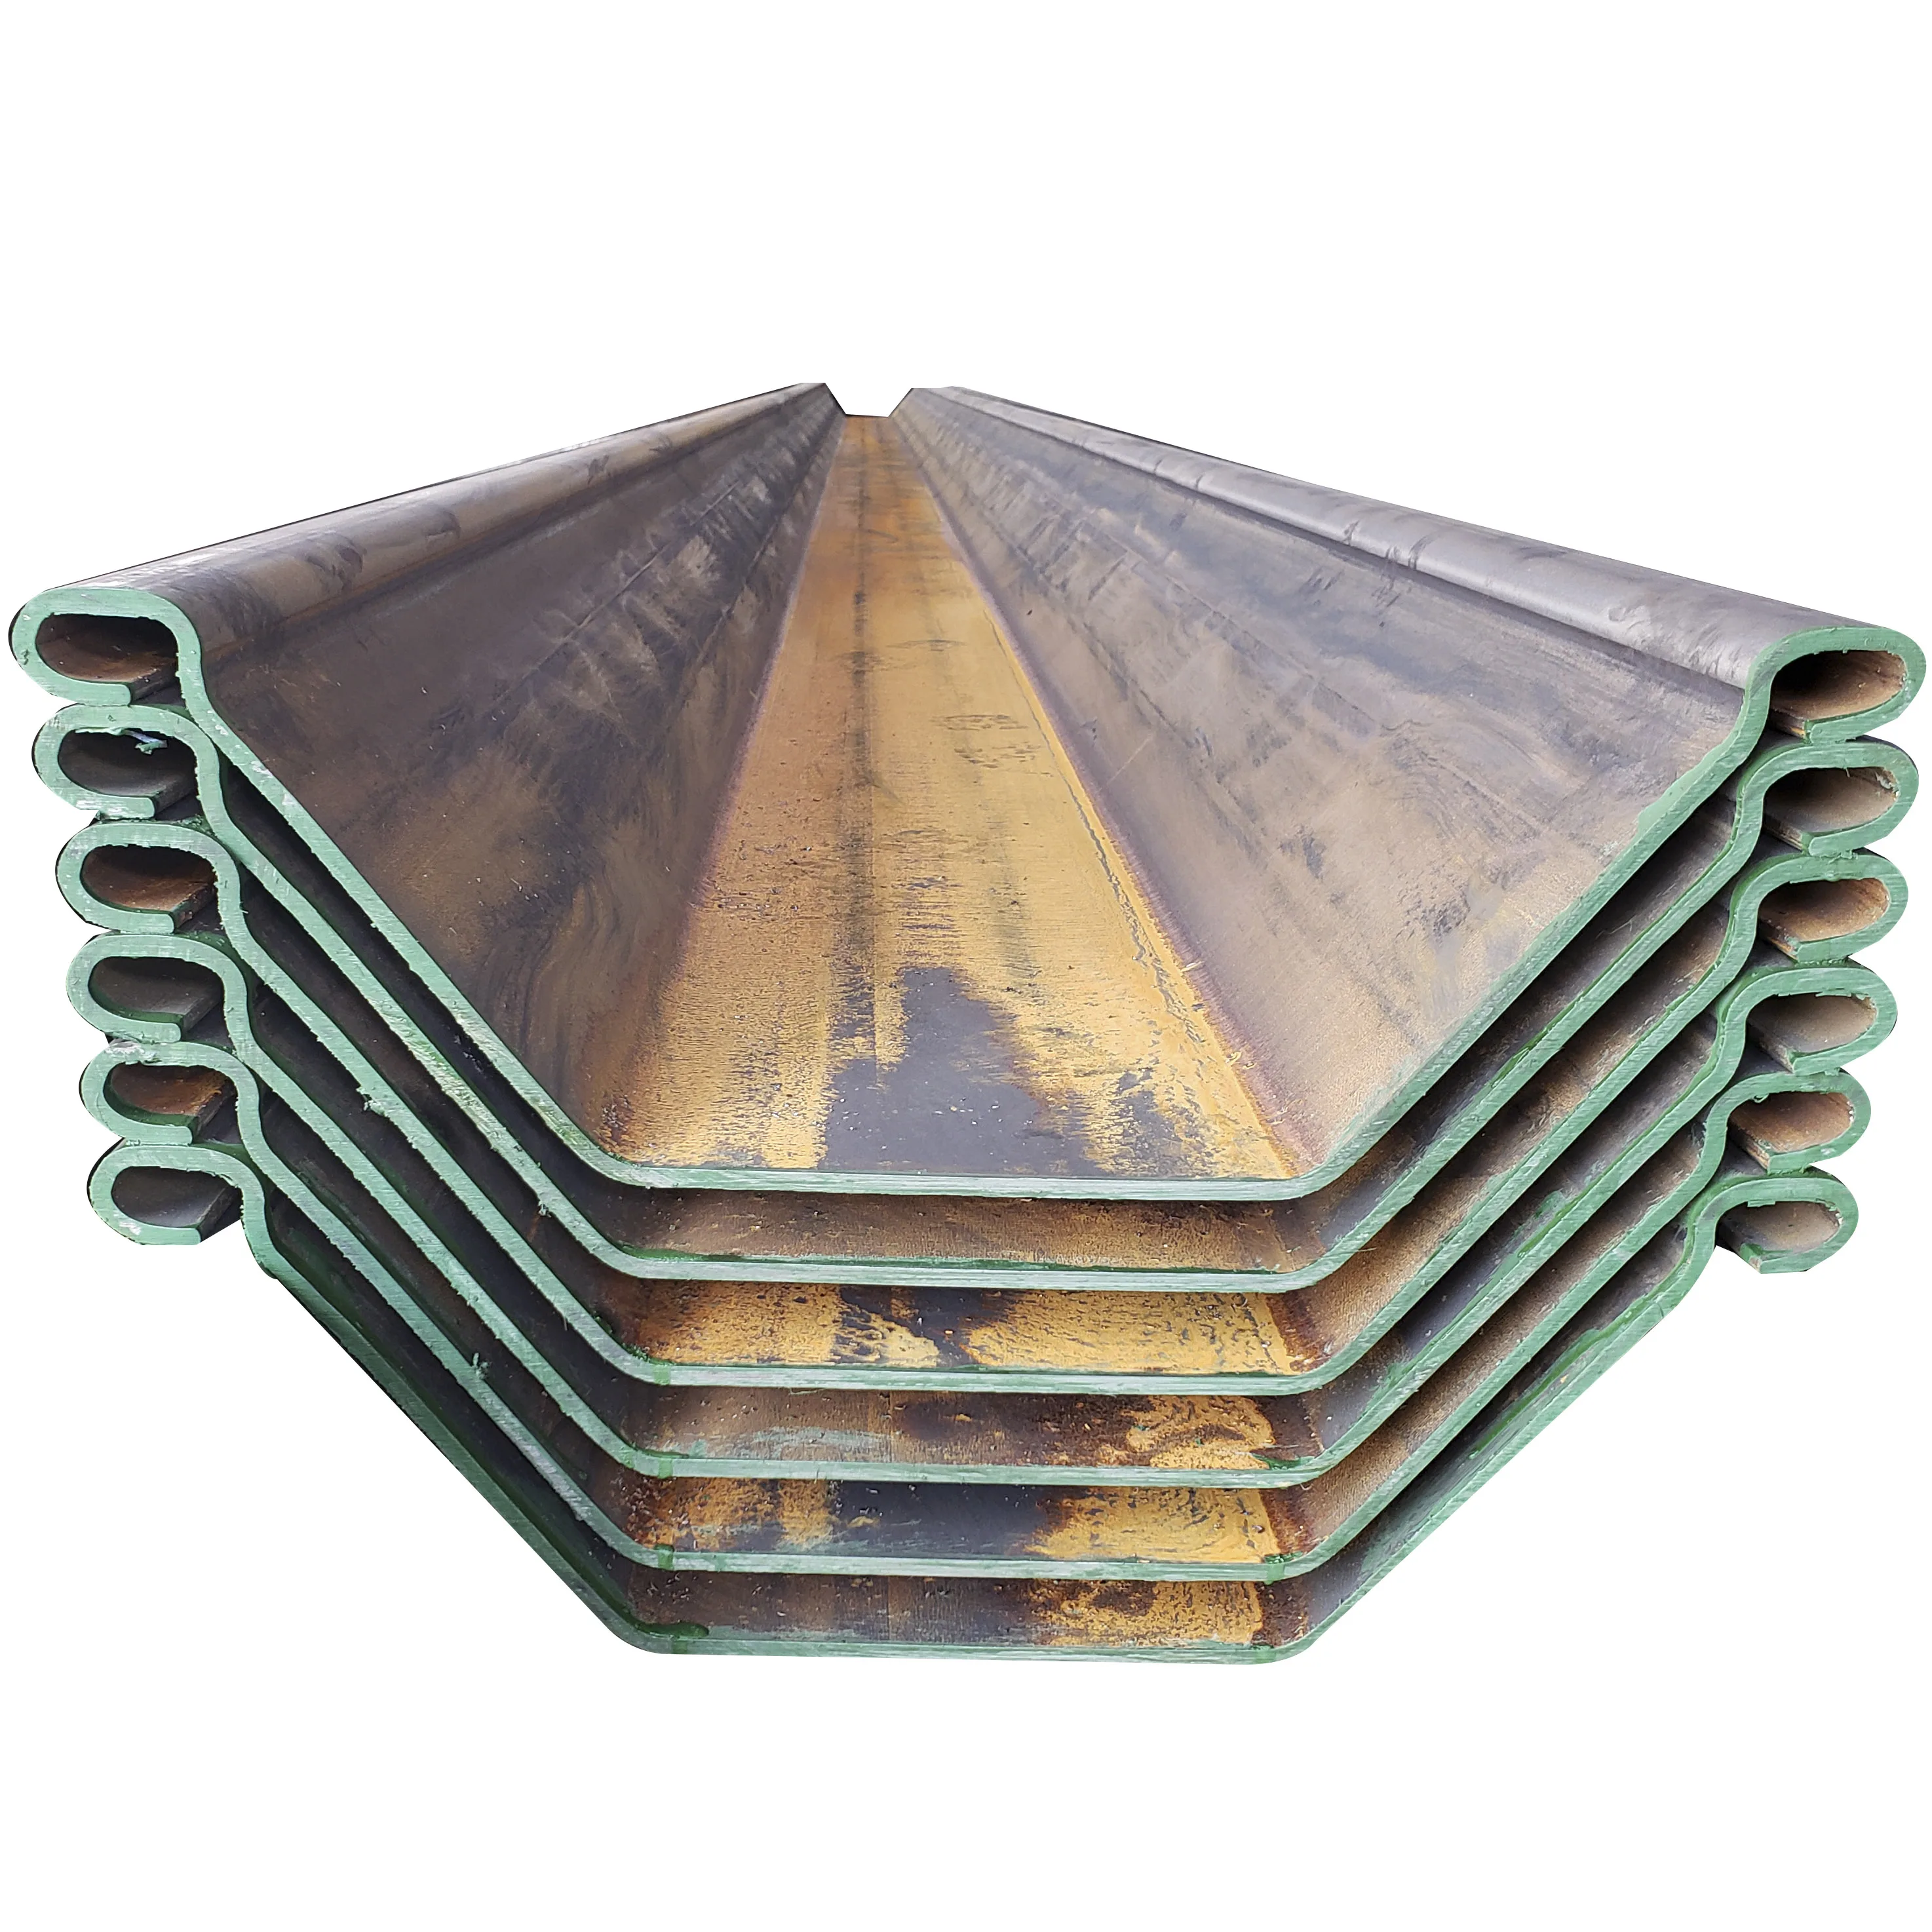 Factory Direct Supply Sheet Pile Steel Hot Rolled Type 2 Steel Sheet Pile With Competitive Price